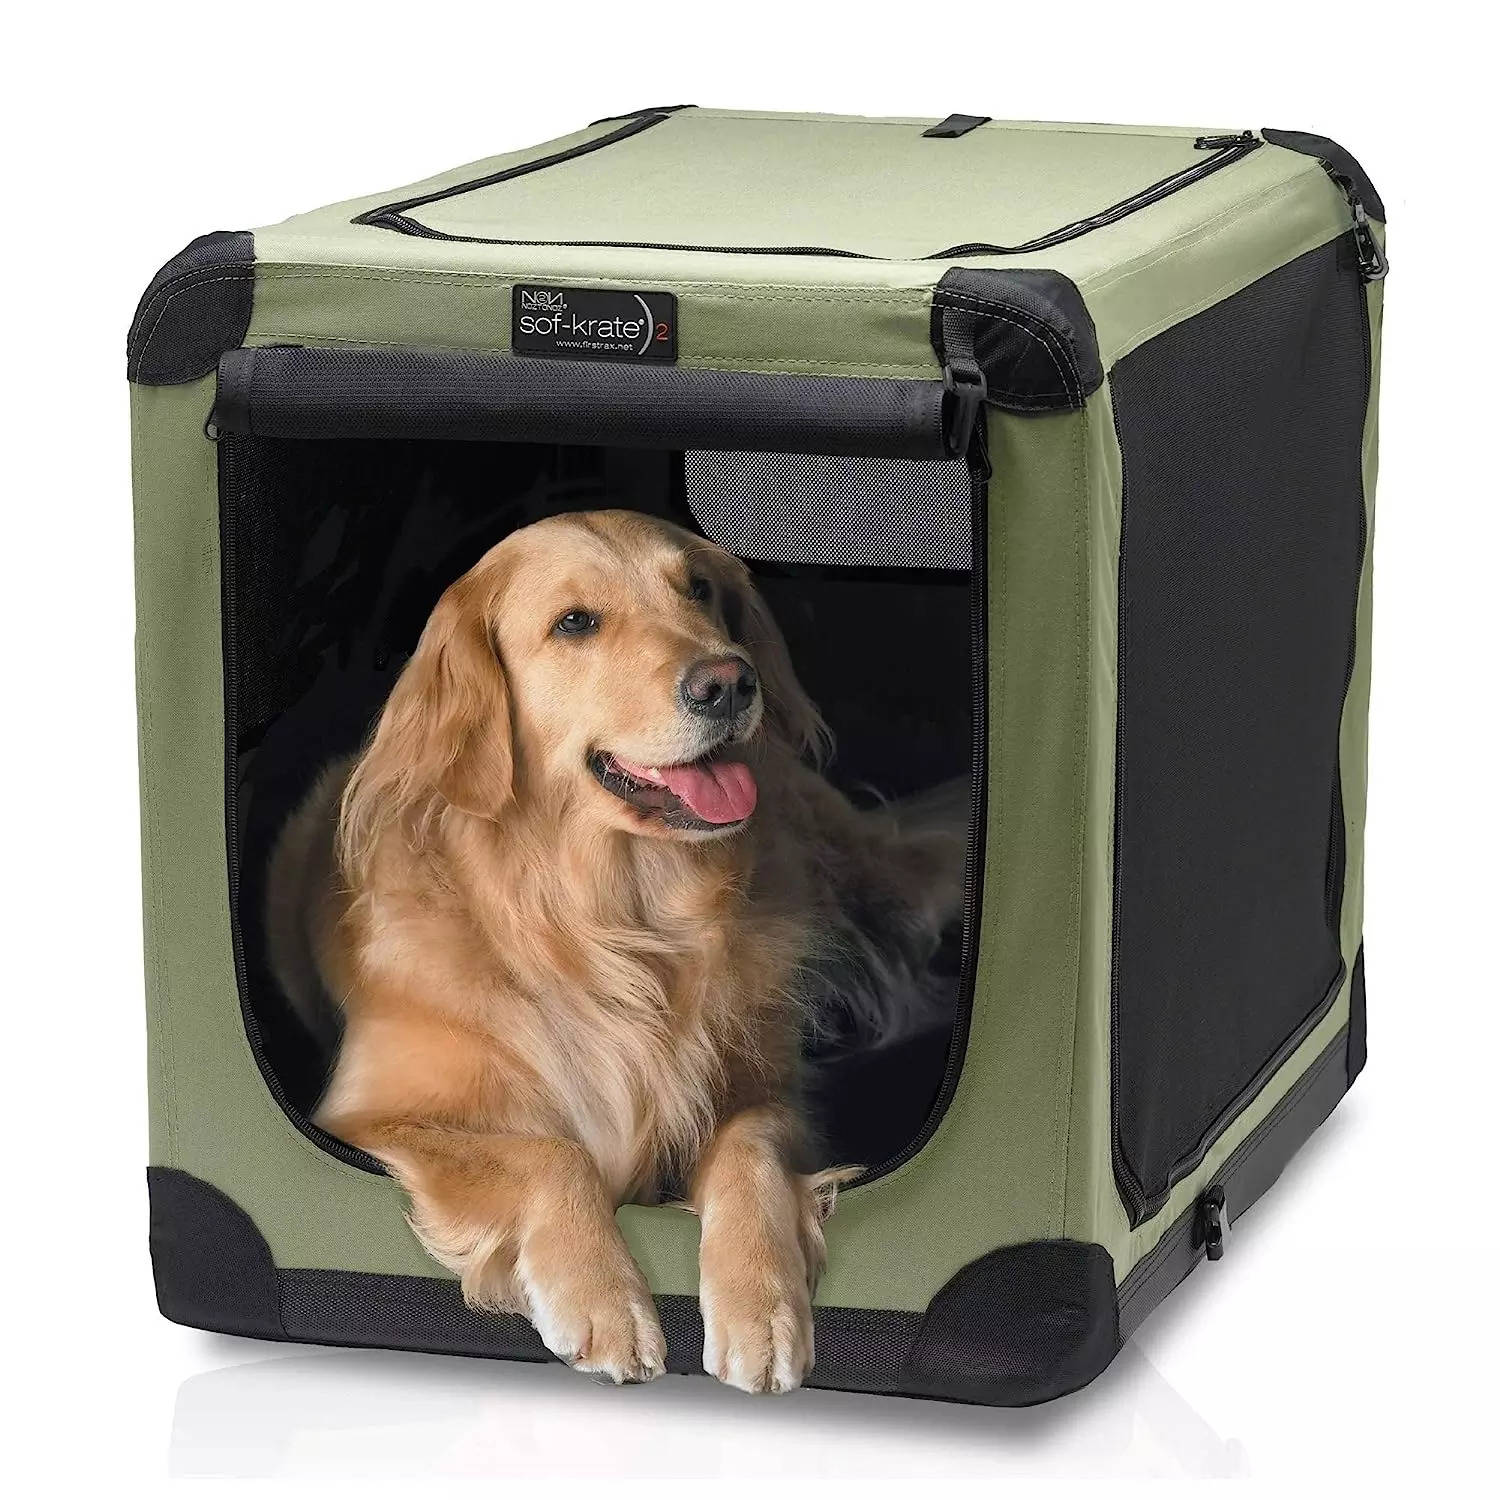 42 inch Dog Crate: 10 Best 42 Inches Dog Crates in India To Keep